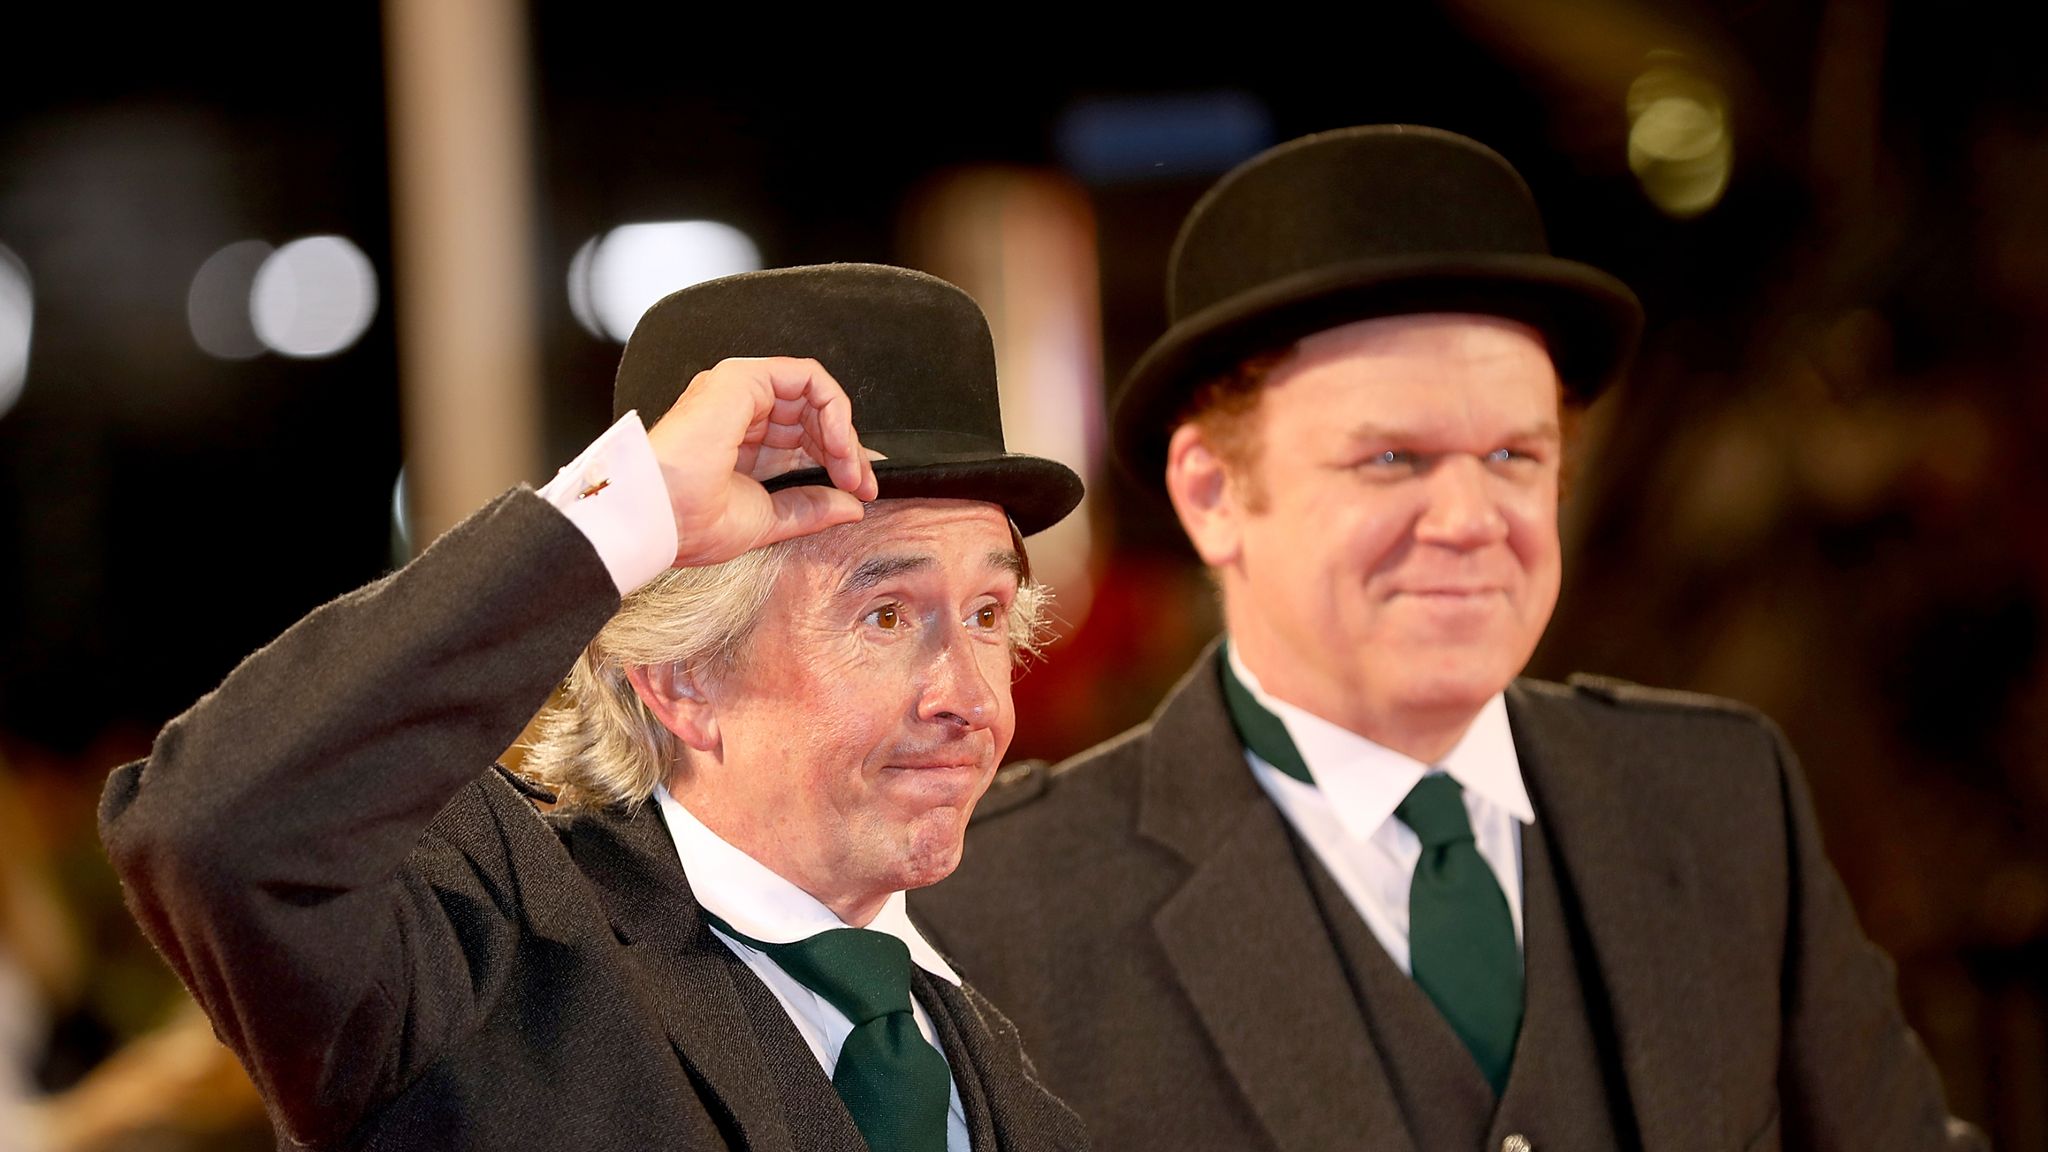 Photo of Stan & Ollie: Laurel and Hardy biopic starring Steve Coogan and John C Reilly ‘a love story with comedy’